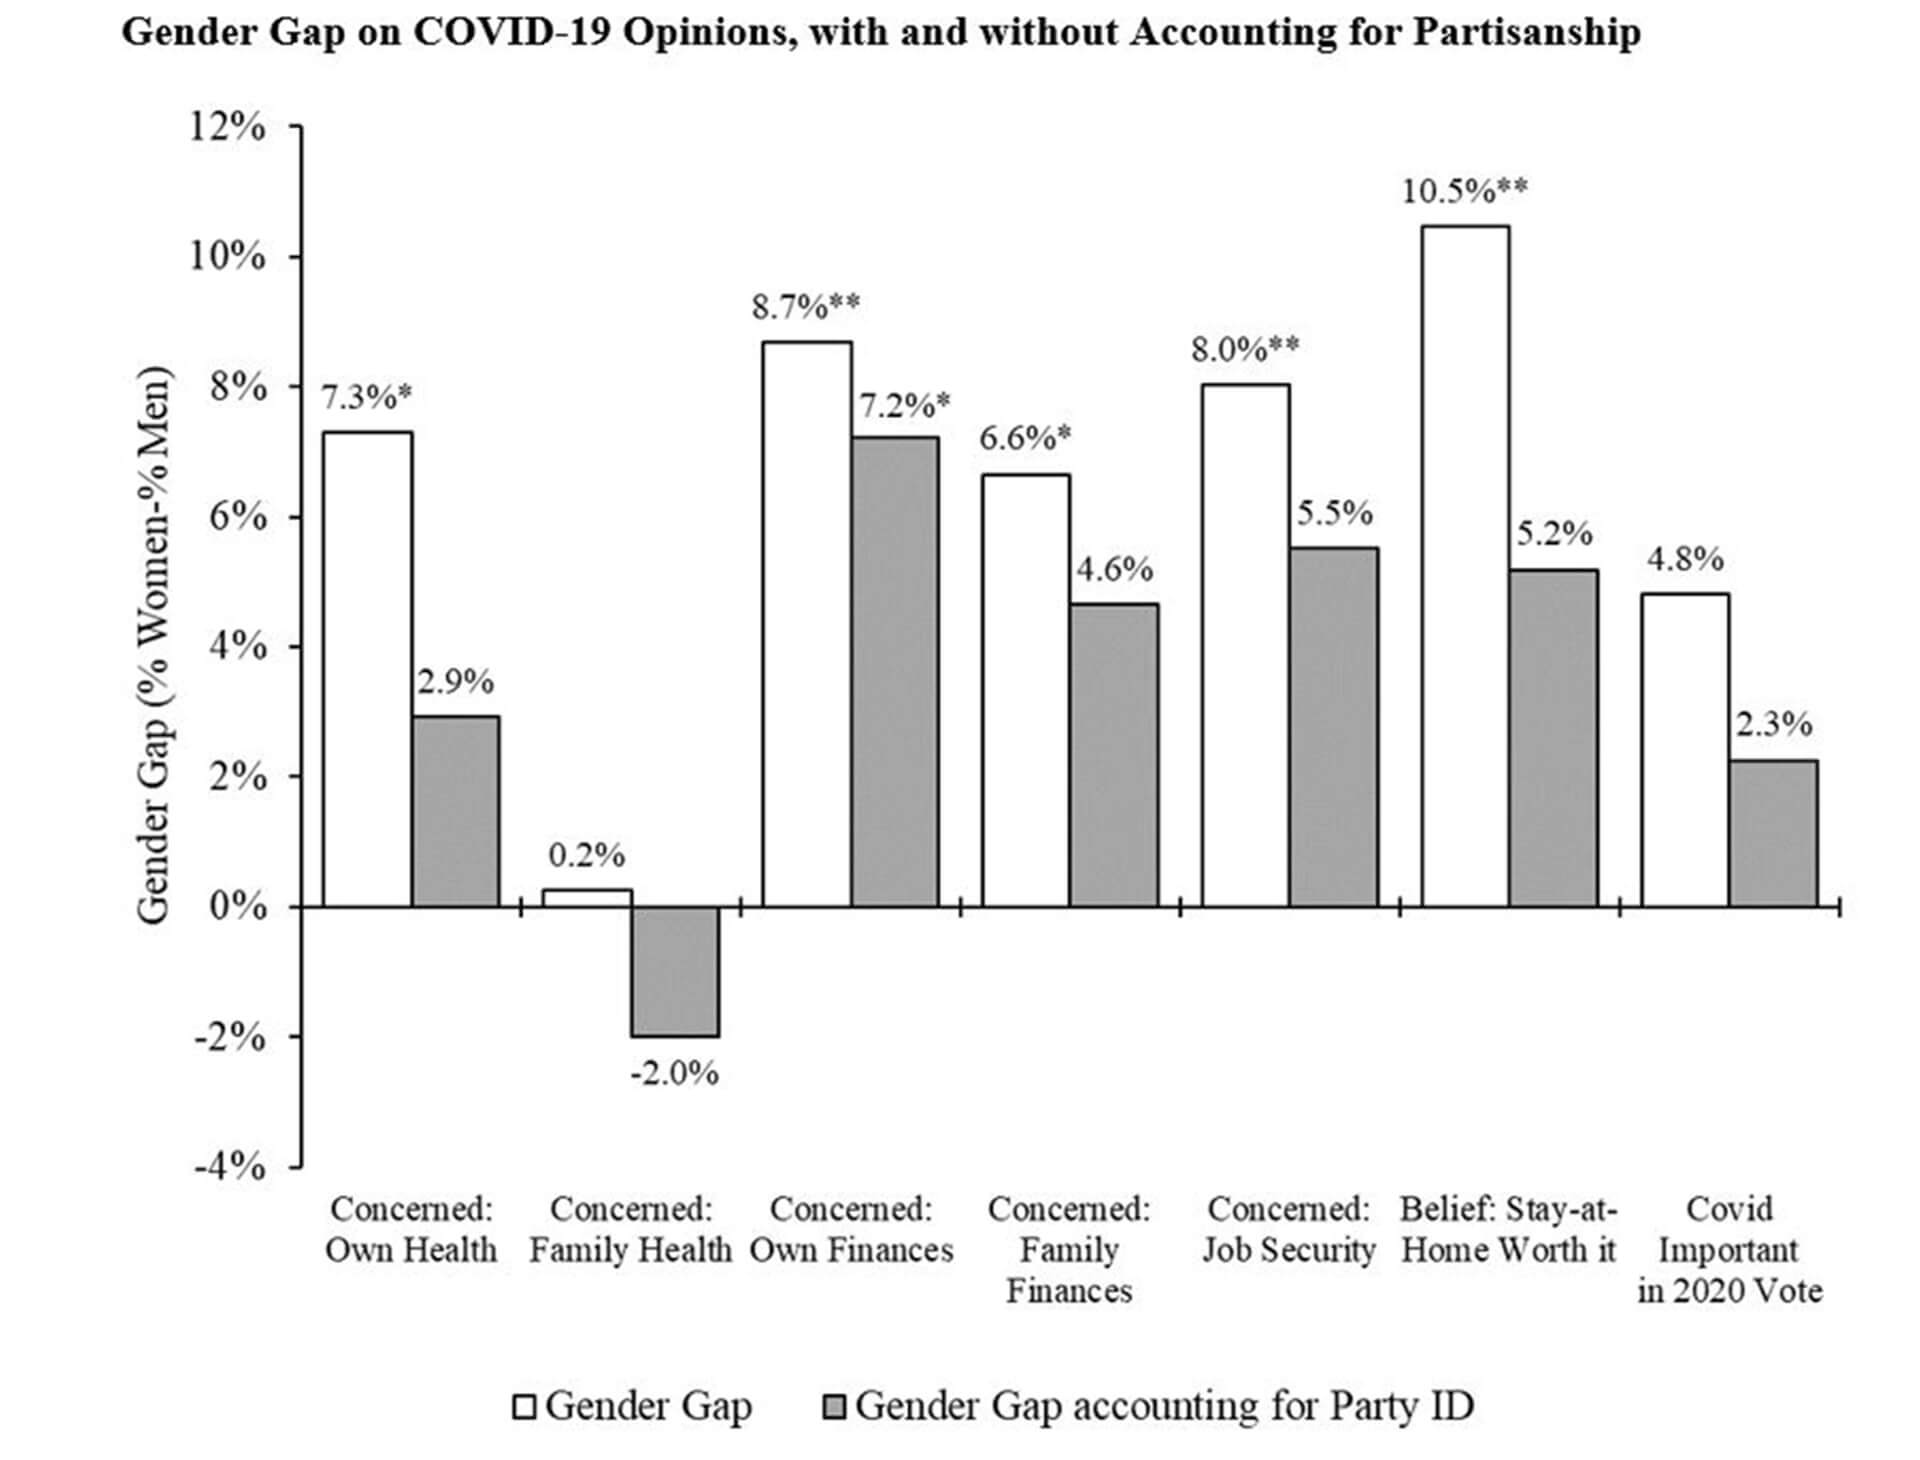 Bar graph: Gender Gap on COVID-19 Opinions, with and without Accounting for Partisanship. Concerned: Own Health: 7.3% gender gap, 2.9% accounting for party ID. Concerned: Family Health: .2% gender gap, -2.0% accounting for party ID. Concerned: Own Finances: 8.7% gender gap, 7.2% accounting for party ID. Concerned: Family Finances: 6.6% gender gap, 4.6% accounting for party ID. Concerned: Job Security: 8.0% gender gap, 5.5% accounting for party ID. Belief: Stay-at-Home Worth It: 10.5% gender gap, 5.2% accounting for party ID. Covid Important in 2020 Vote: 4.8% gender gap, 2.3% accounting for party ID.